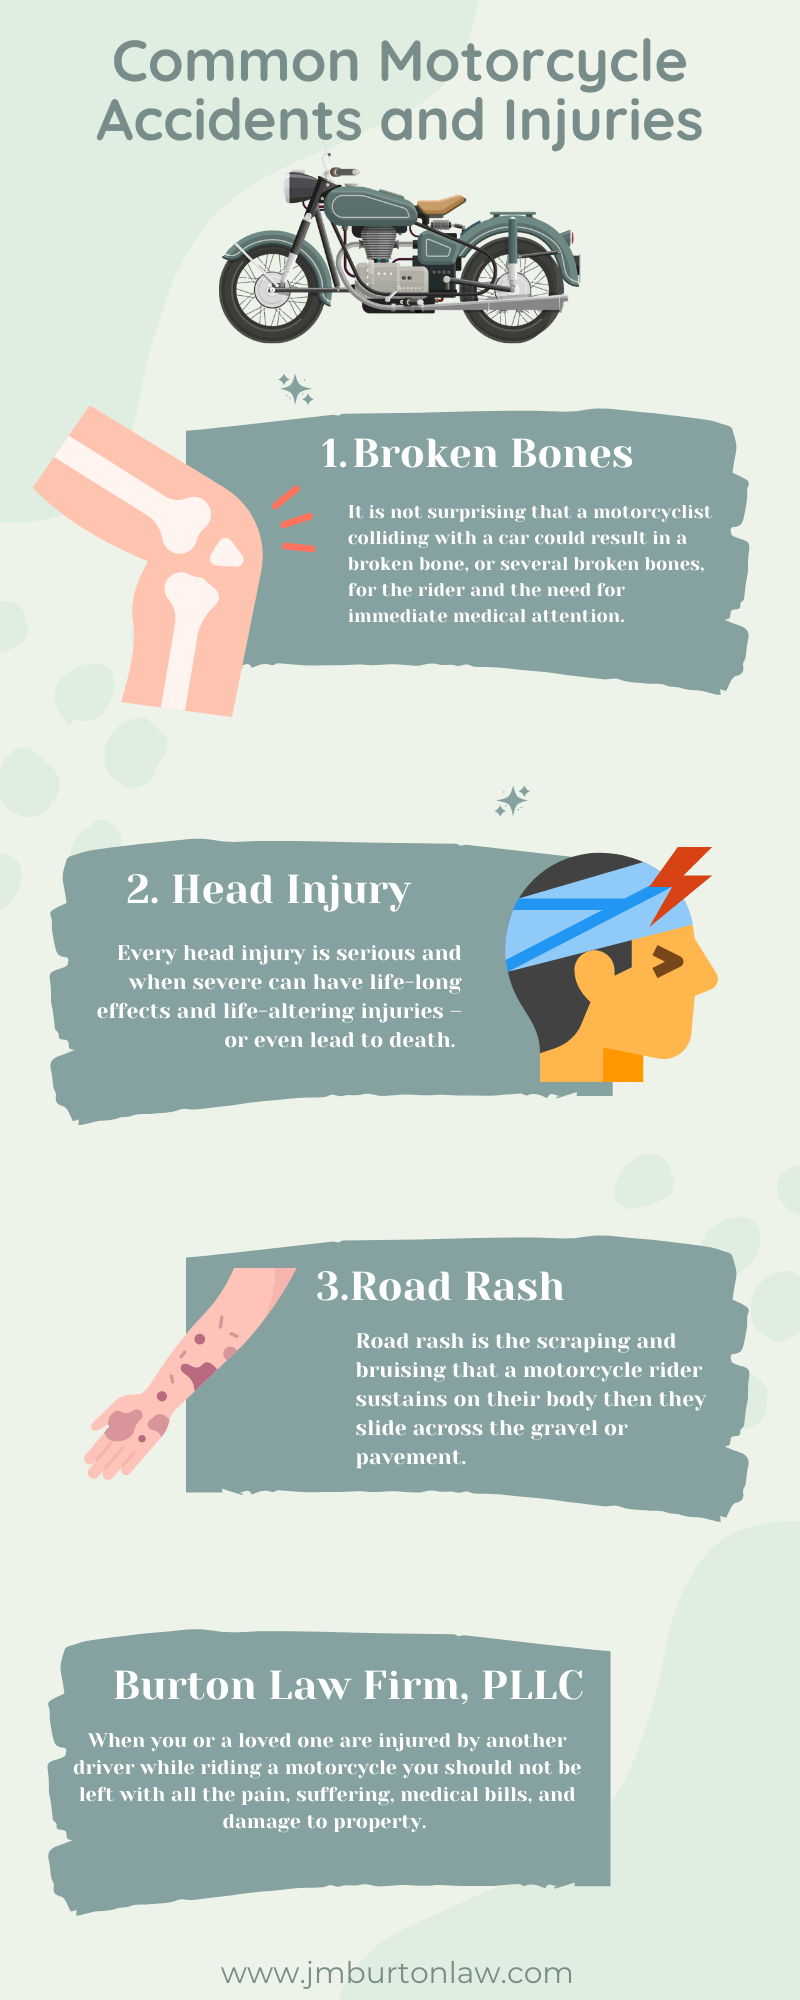 Common Motorcycle Accidents and Injuries Infographic